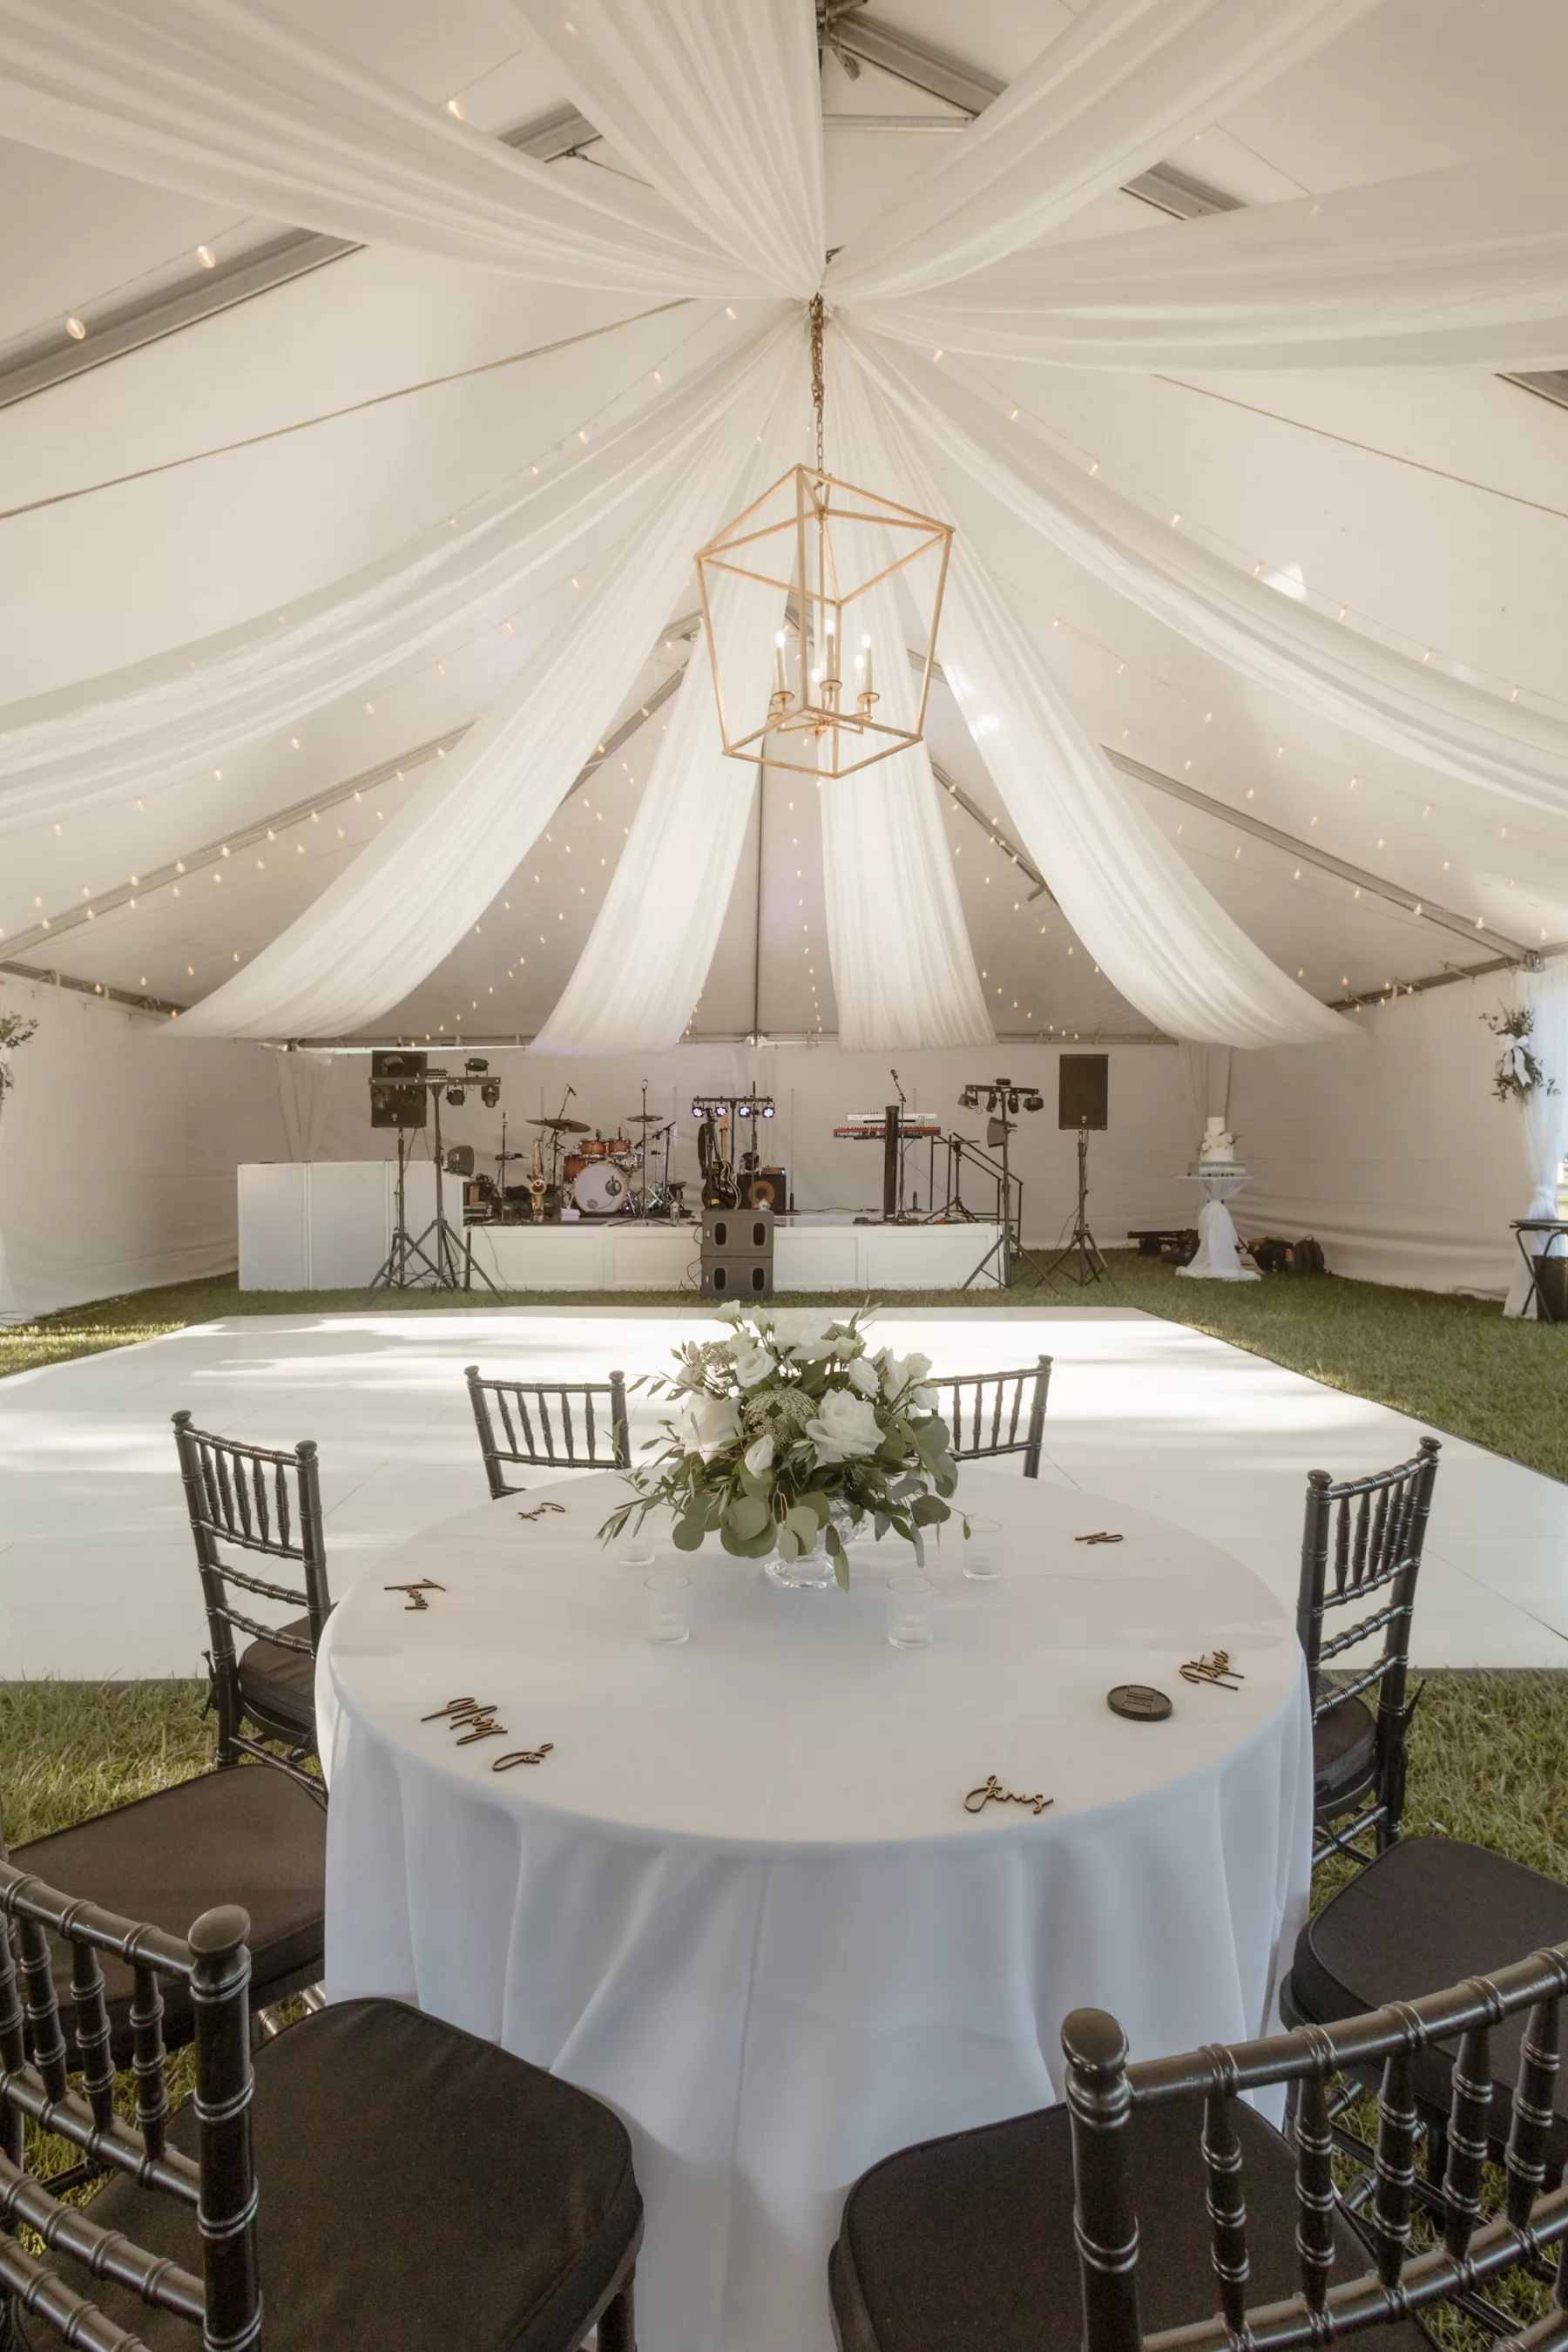 Timeless Tented Fall Wedding Reception with White Drapery and Dancefloor Inspiration